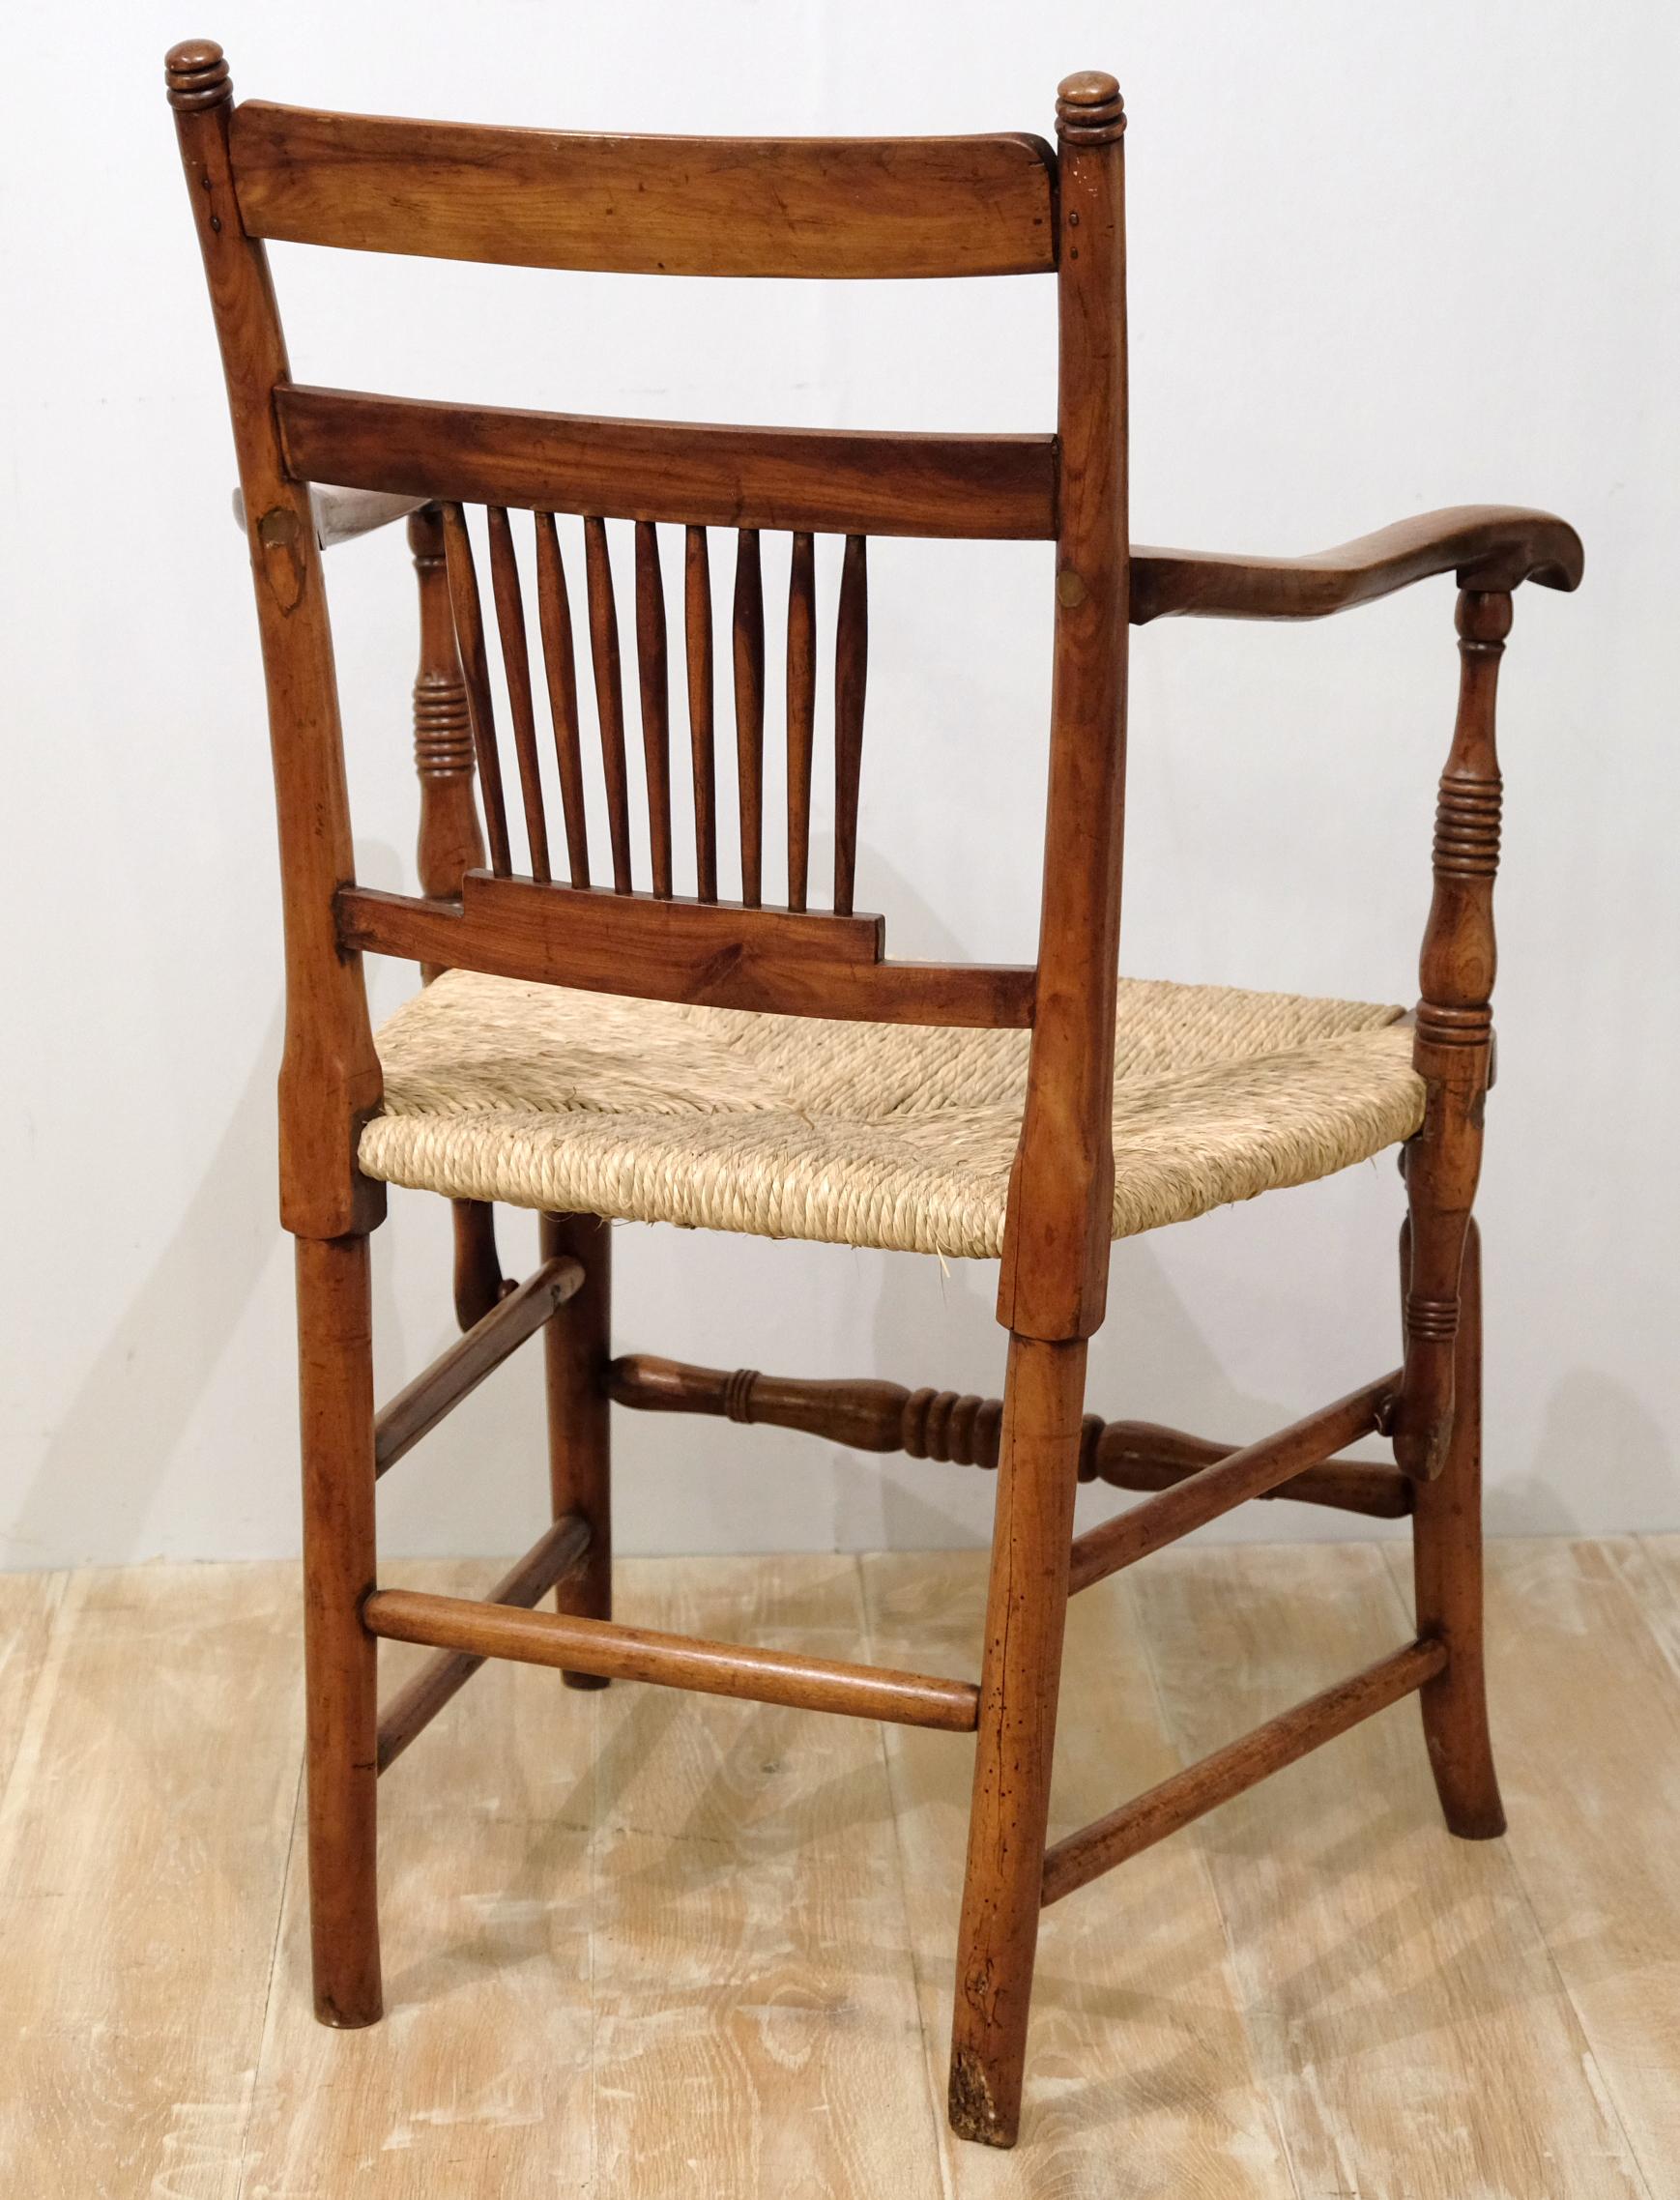 English Fruitwood Windsor Chair with Rush Seat, East Anglia, Rich Color 1